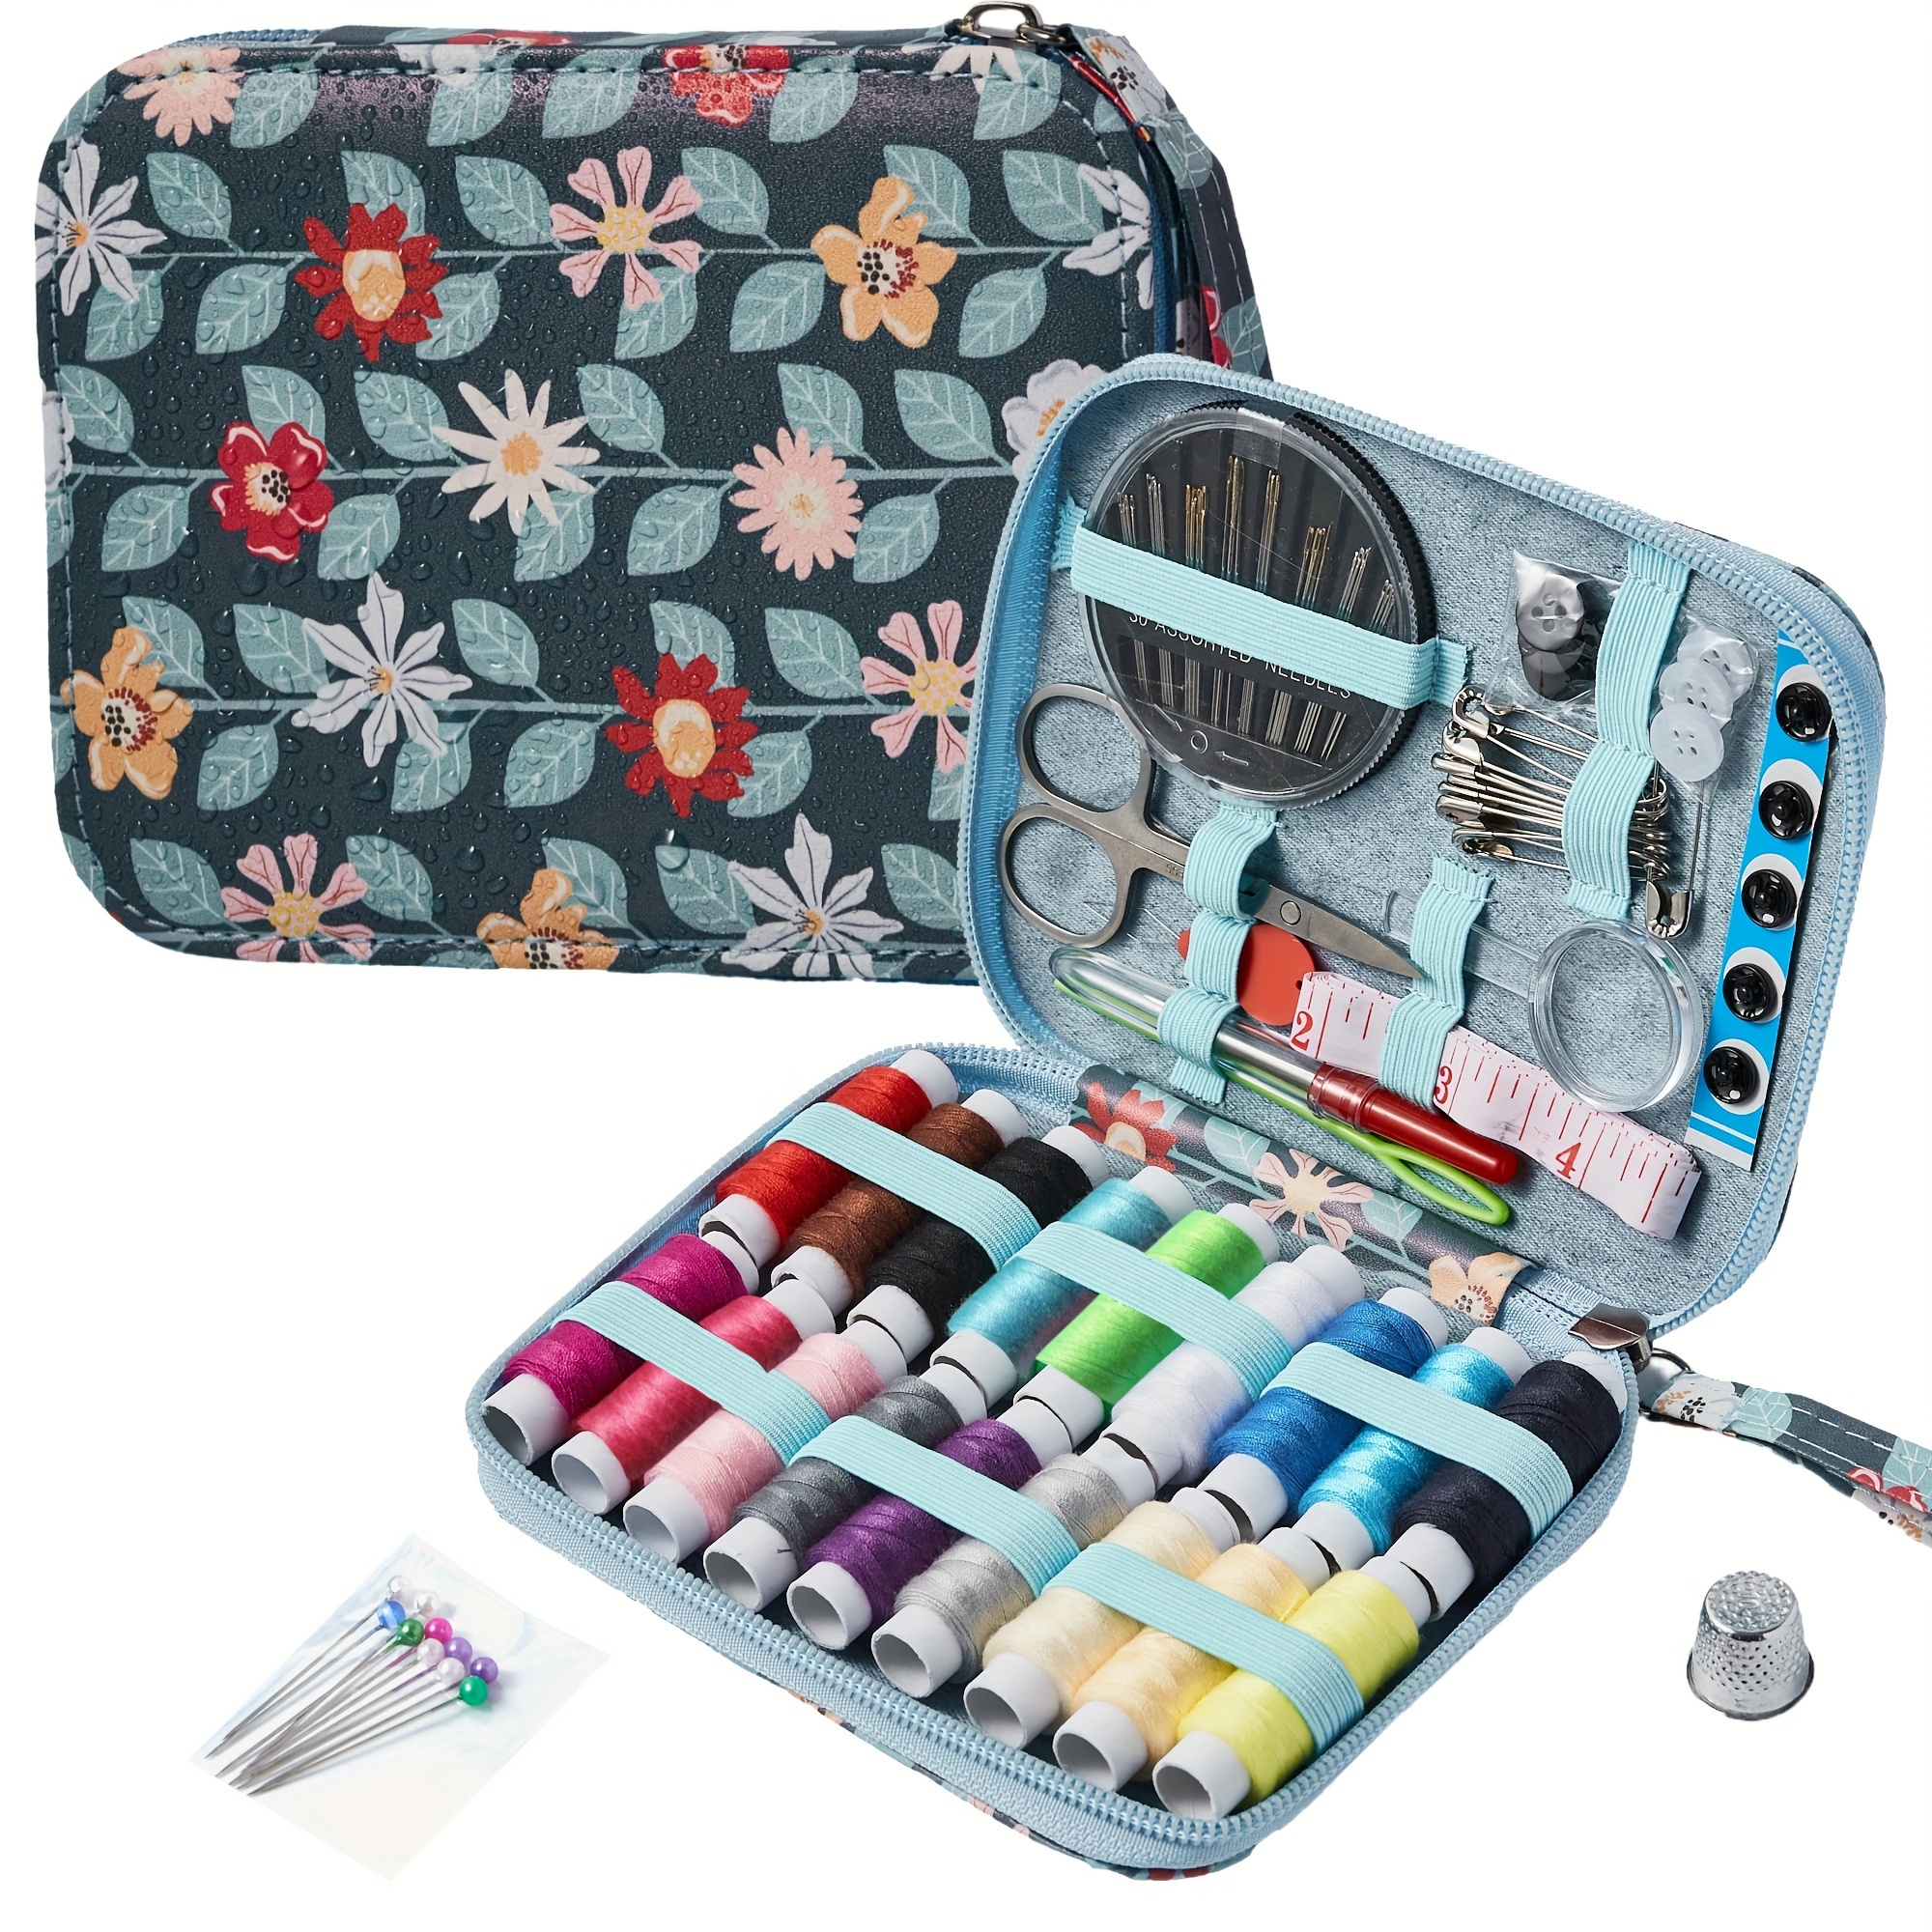 

diy Essentials" 87-piece Deluxe Sewing Kit With Scissors, Tape Measure & Needle Threader - Complete Emergency Repair Set For Adults, Beginners, Home & Travel Use - Dark Green